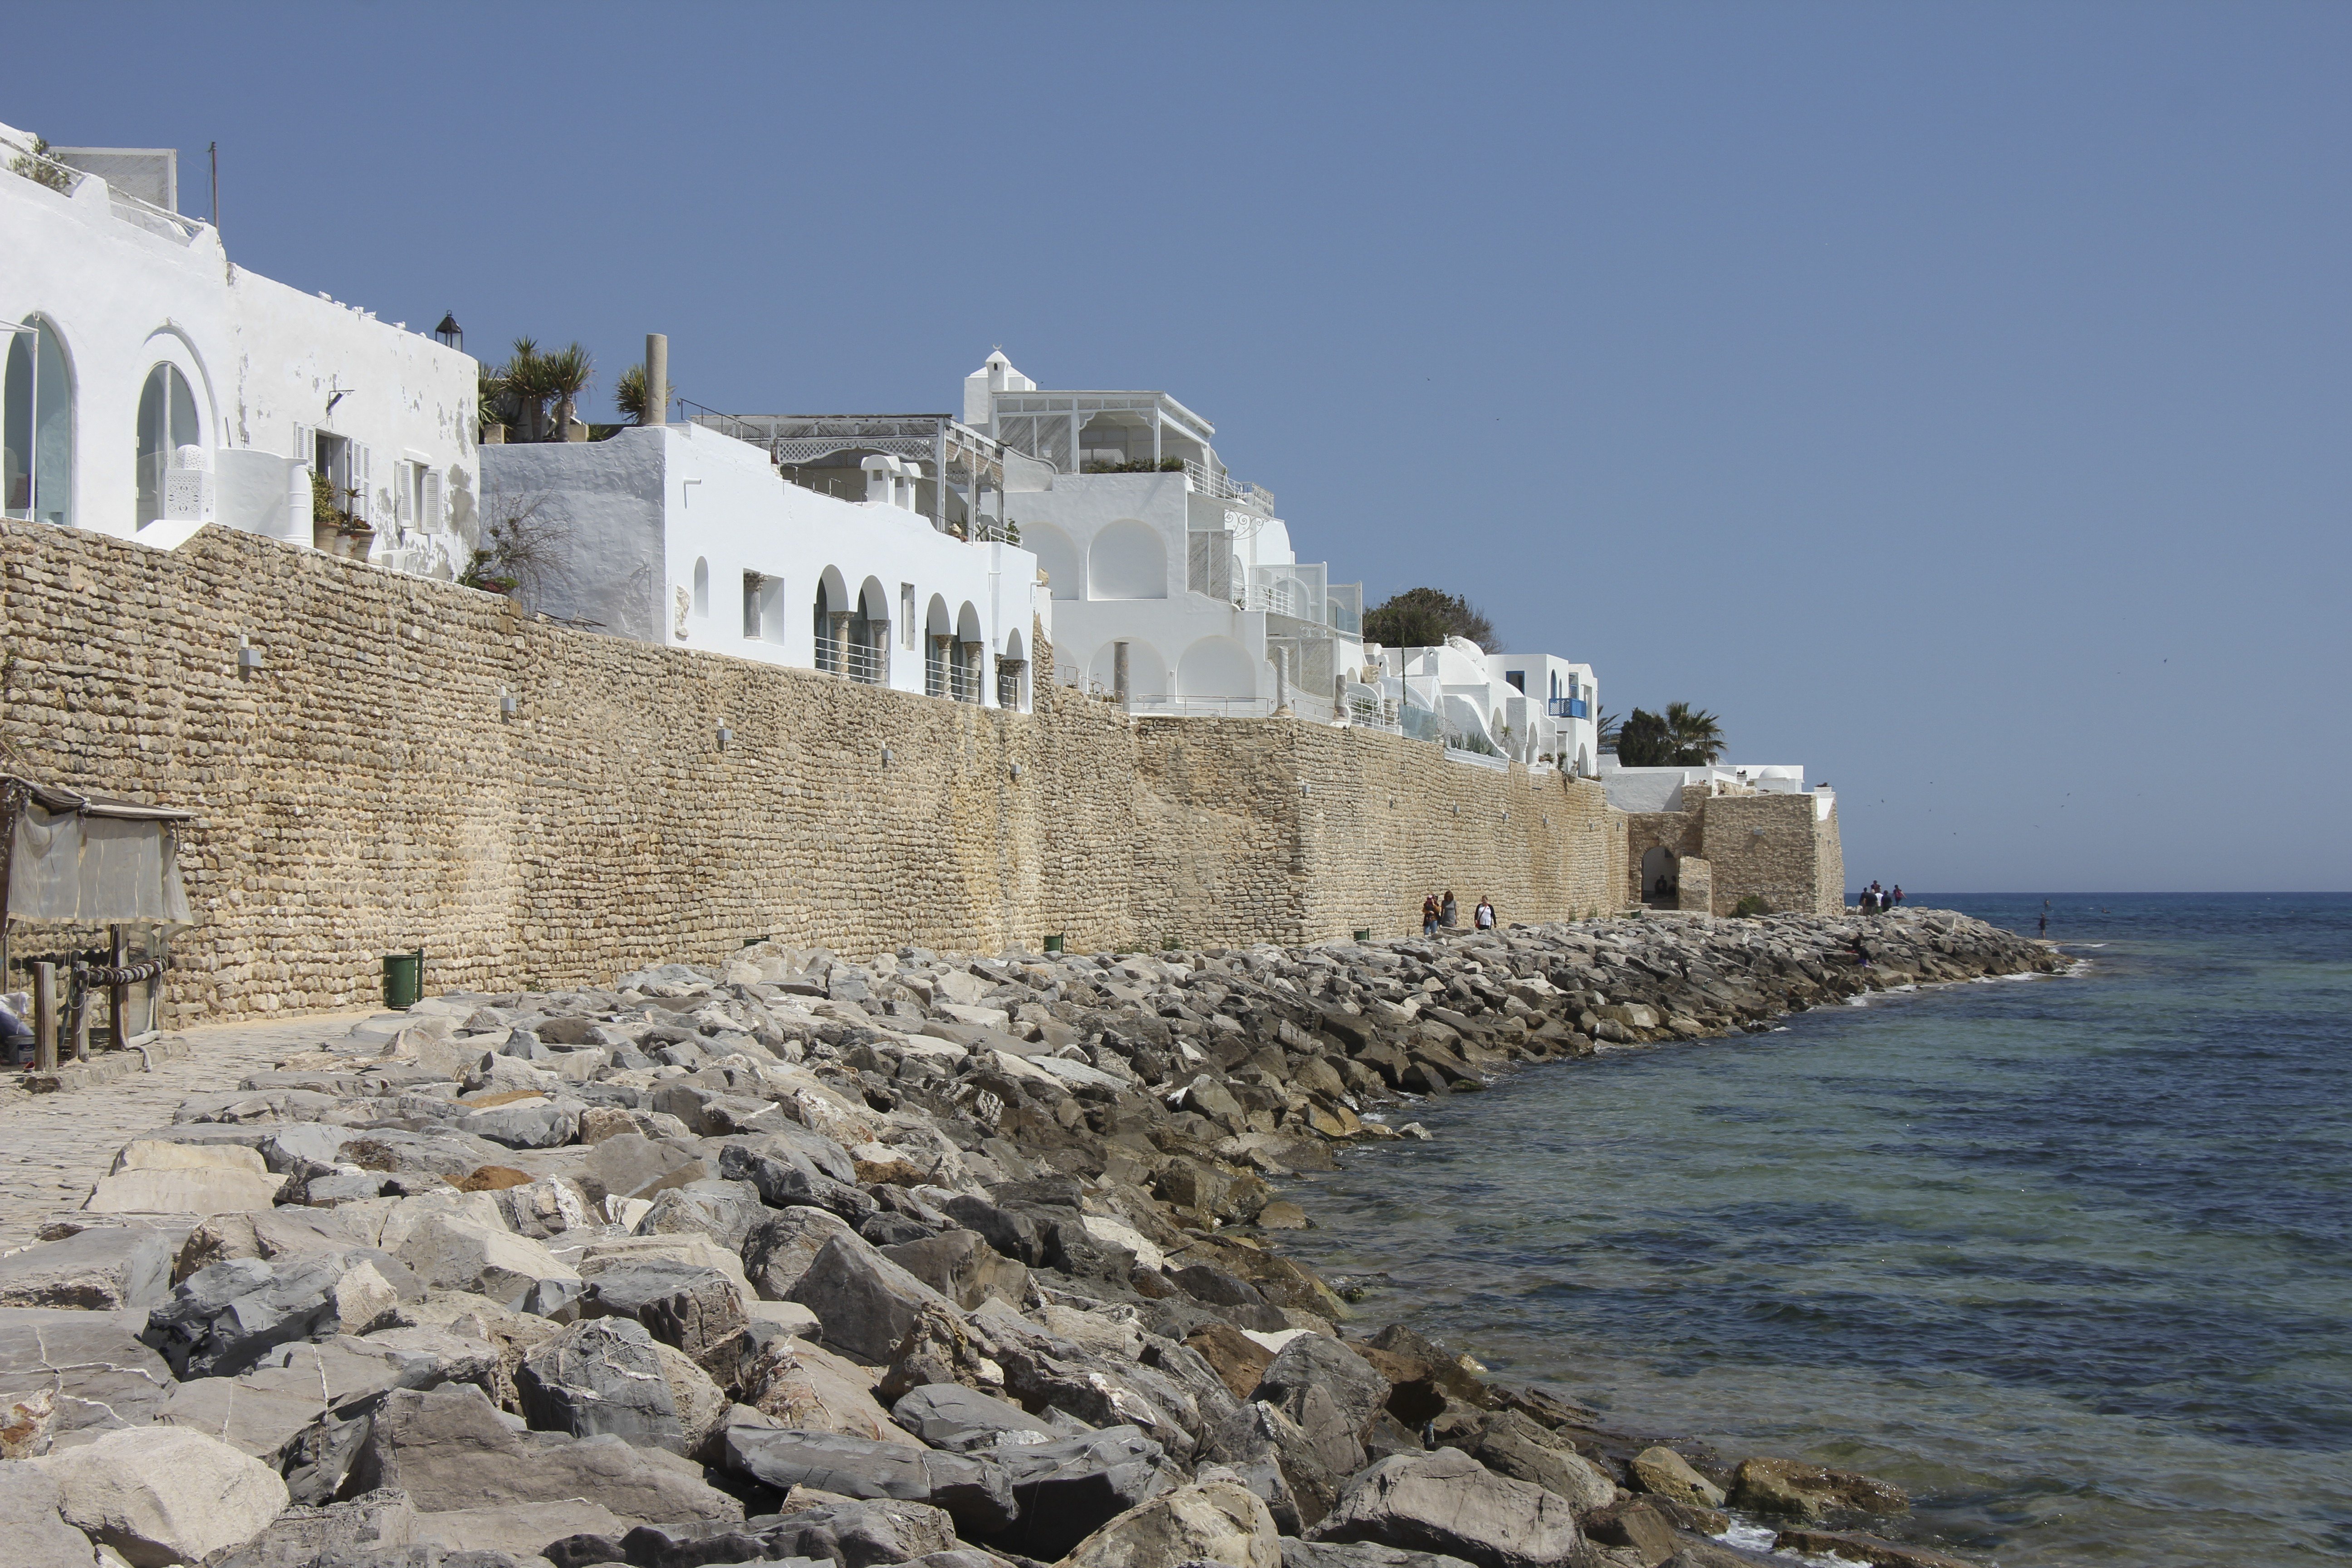 The walled fishing port of Hammamet, in Tunisia, a haven for travellers looking for an alternative to mass tourism. Photo: John Brunton